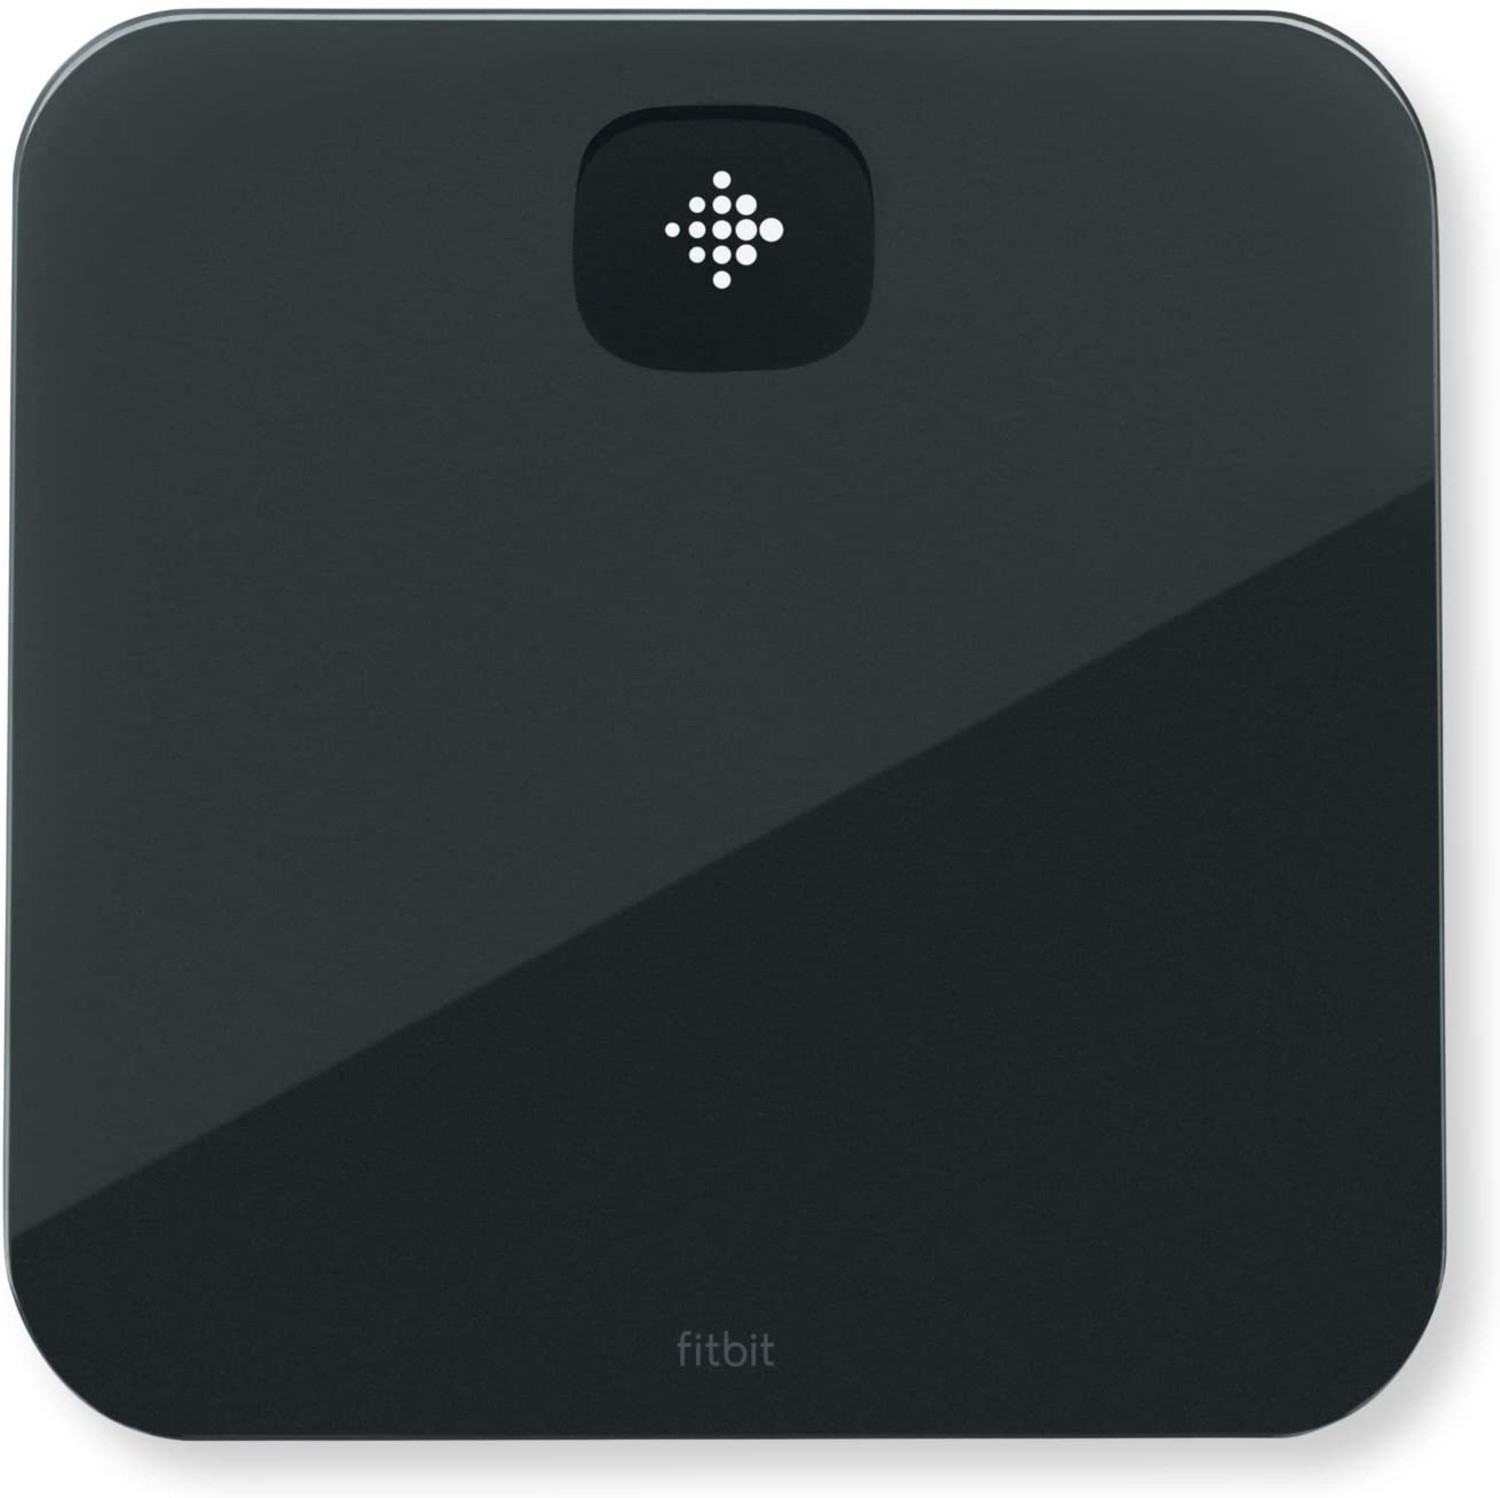 Fitbit Aria Air Bluetooth smart scale tracks weight, BMI, and